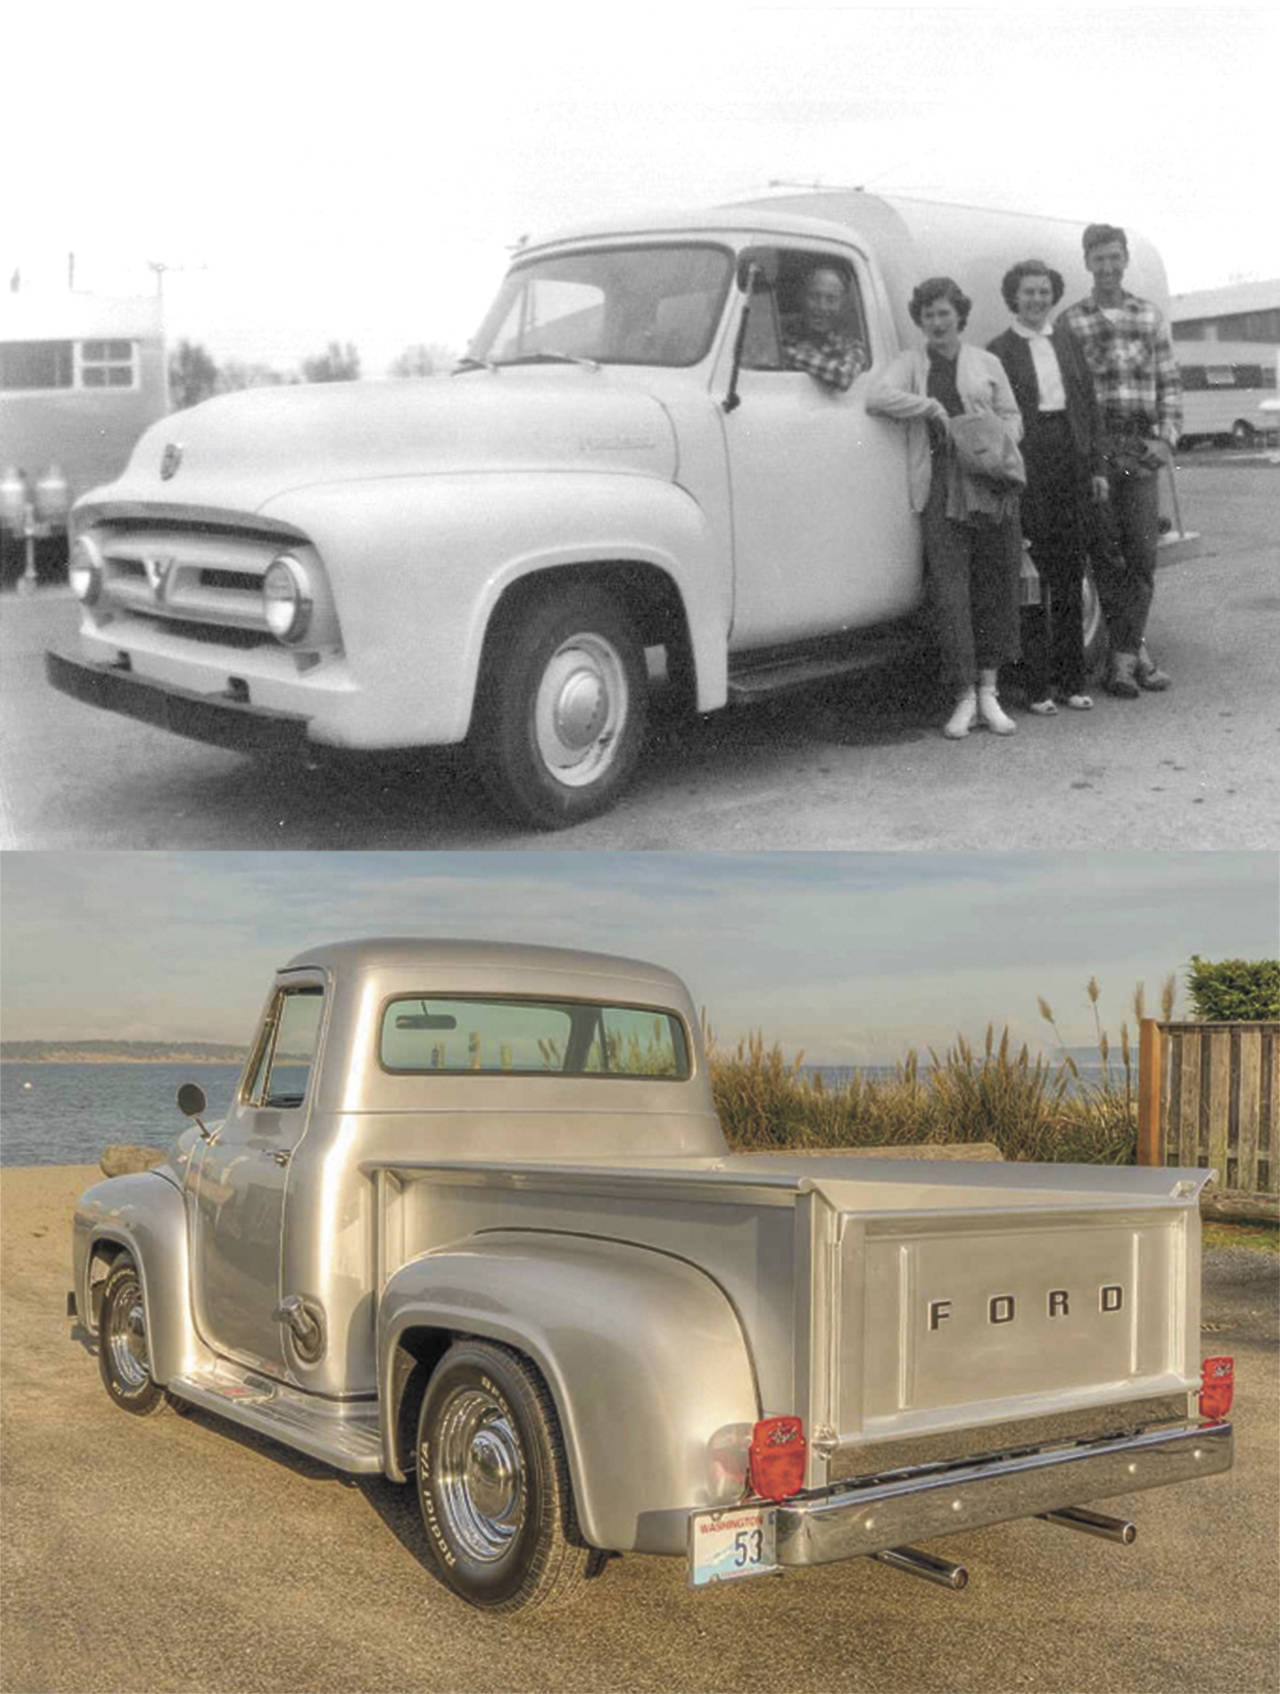 Old truck gets a new lease on life